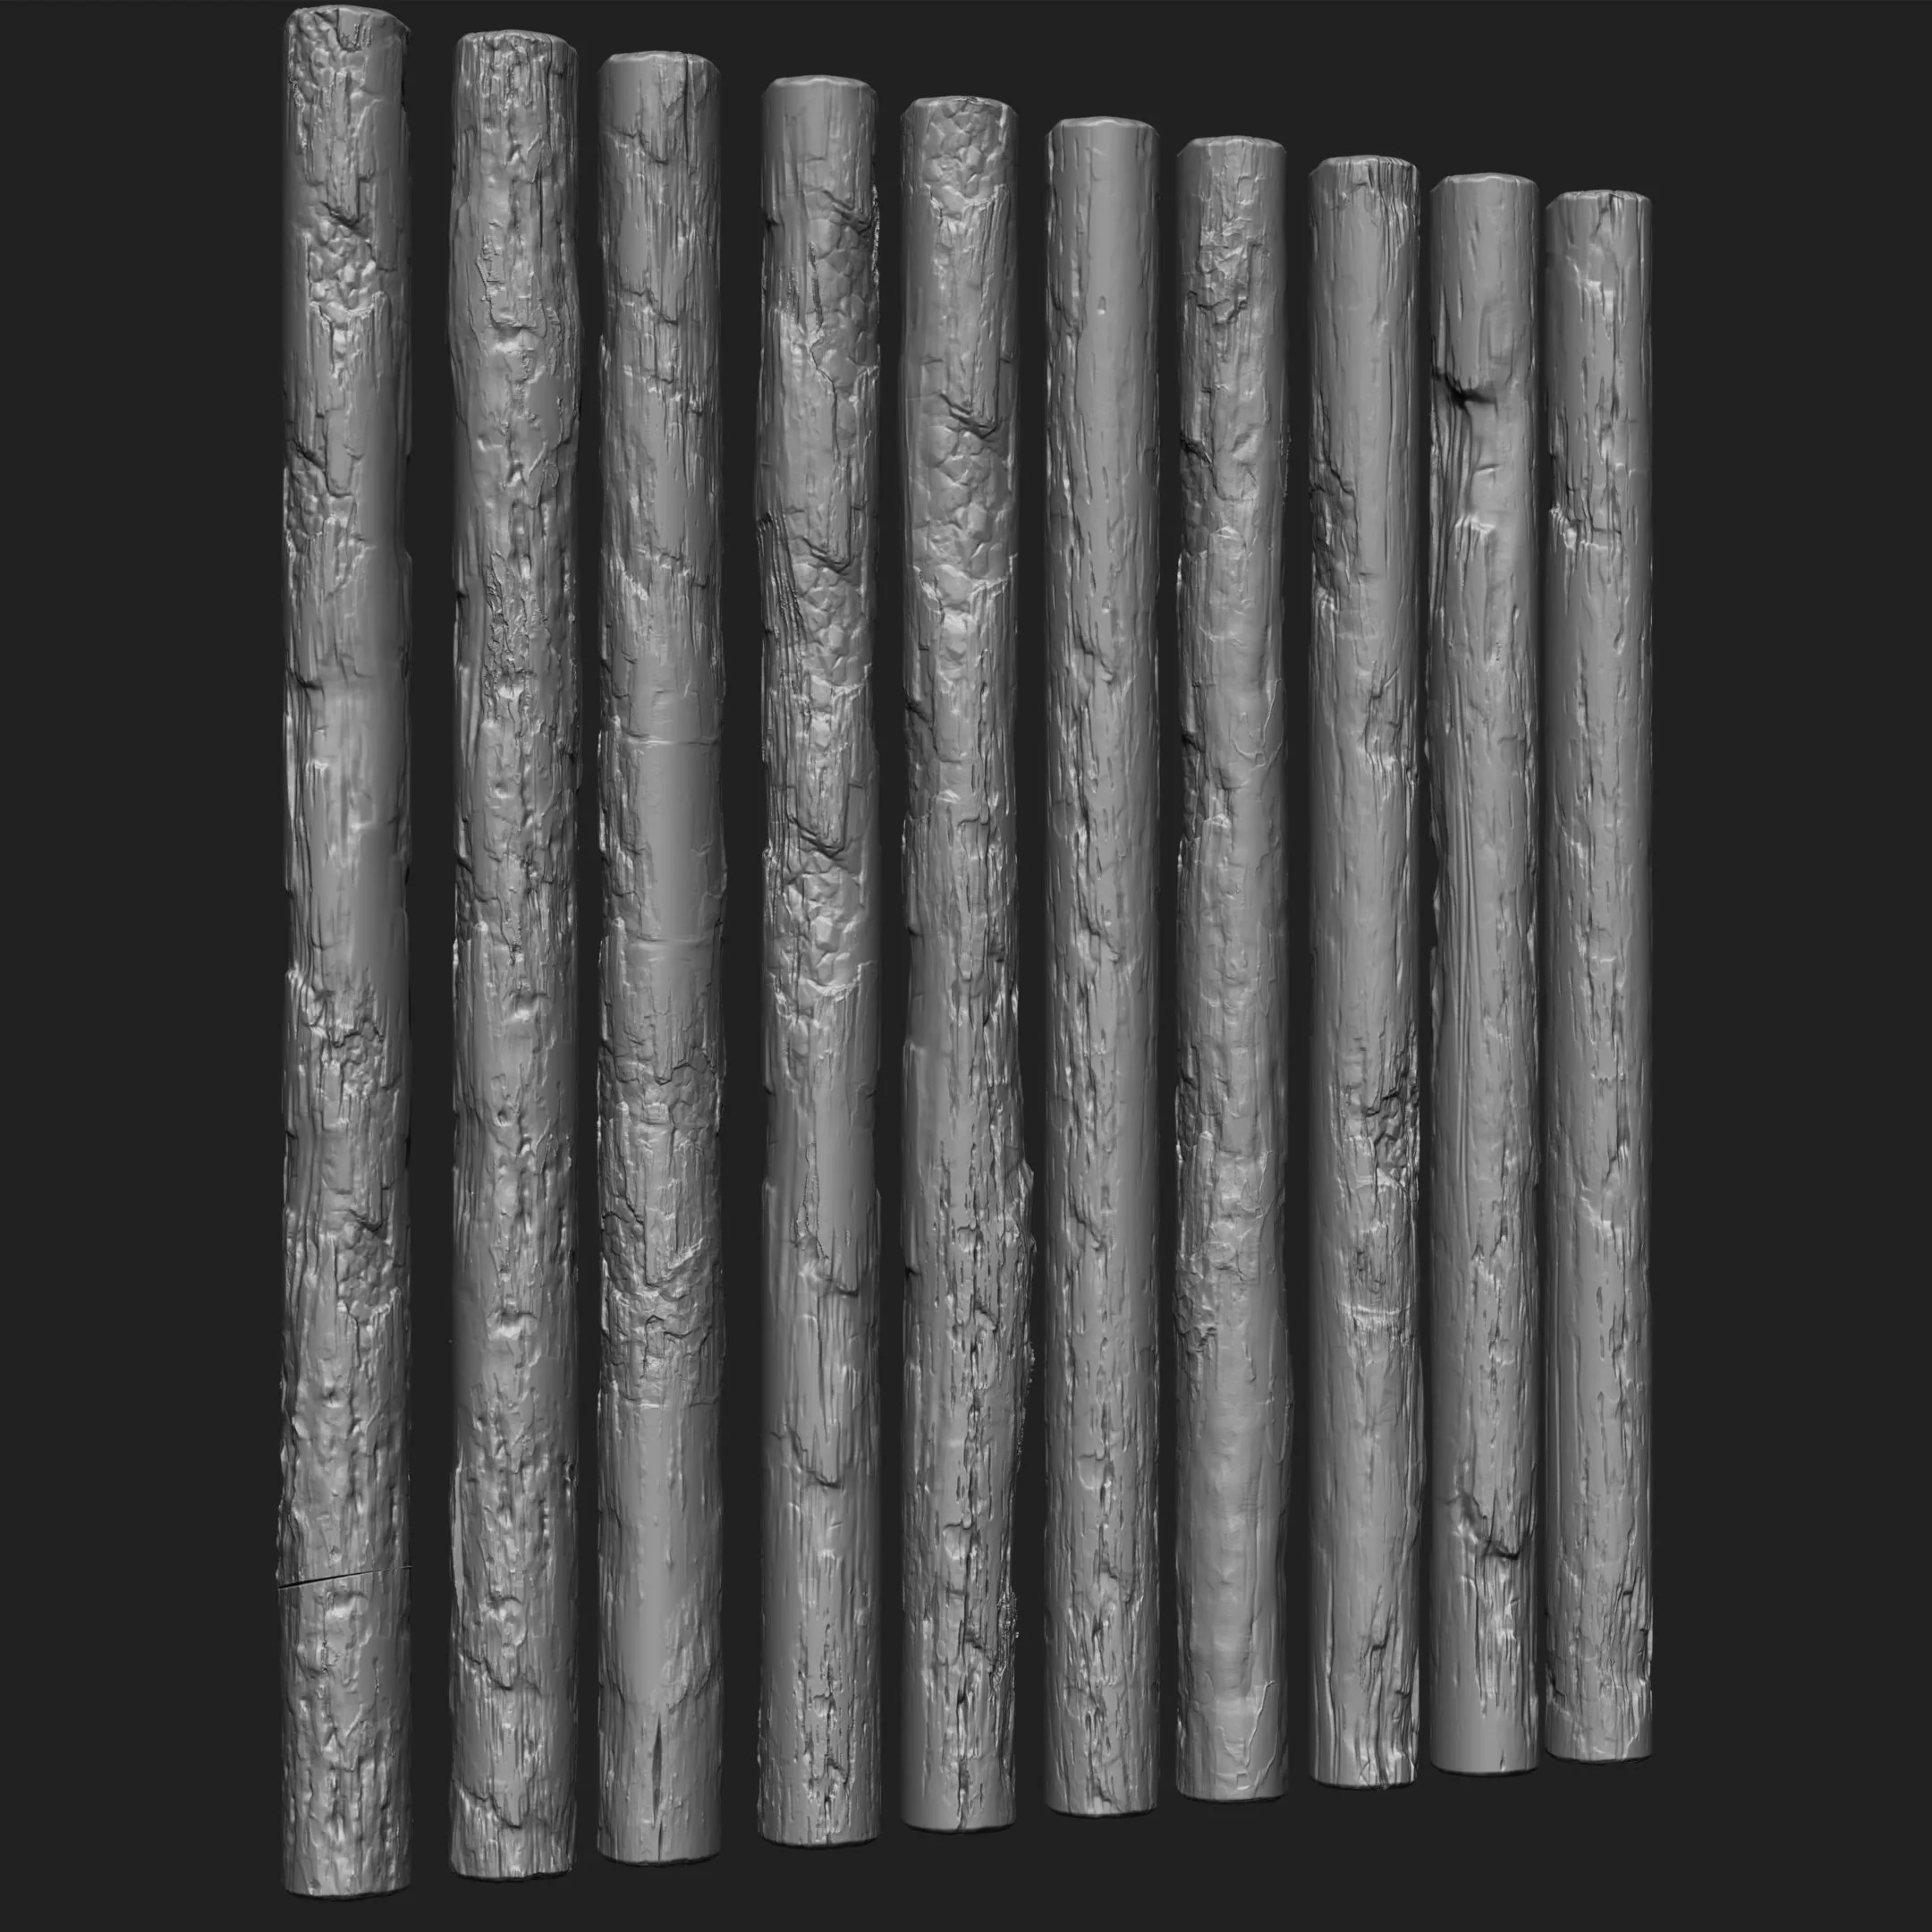 Wooden Plank IMM Brush Pack 21 in One